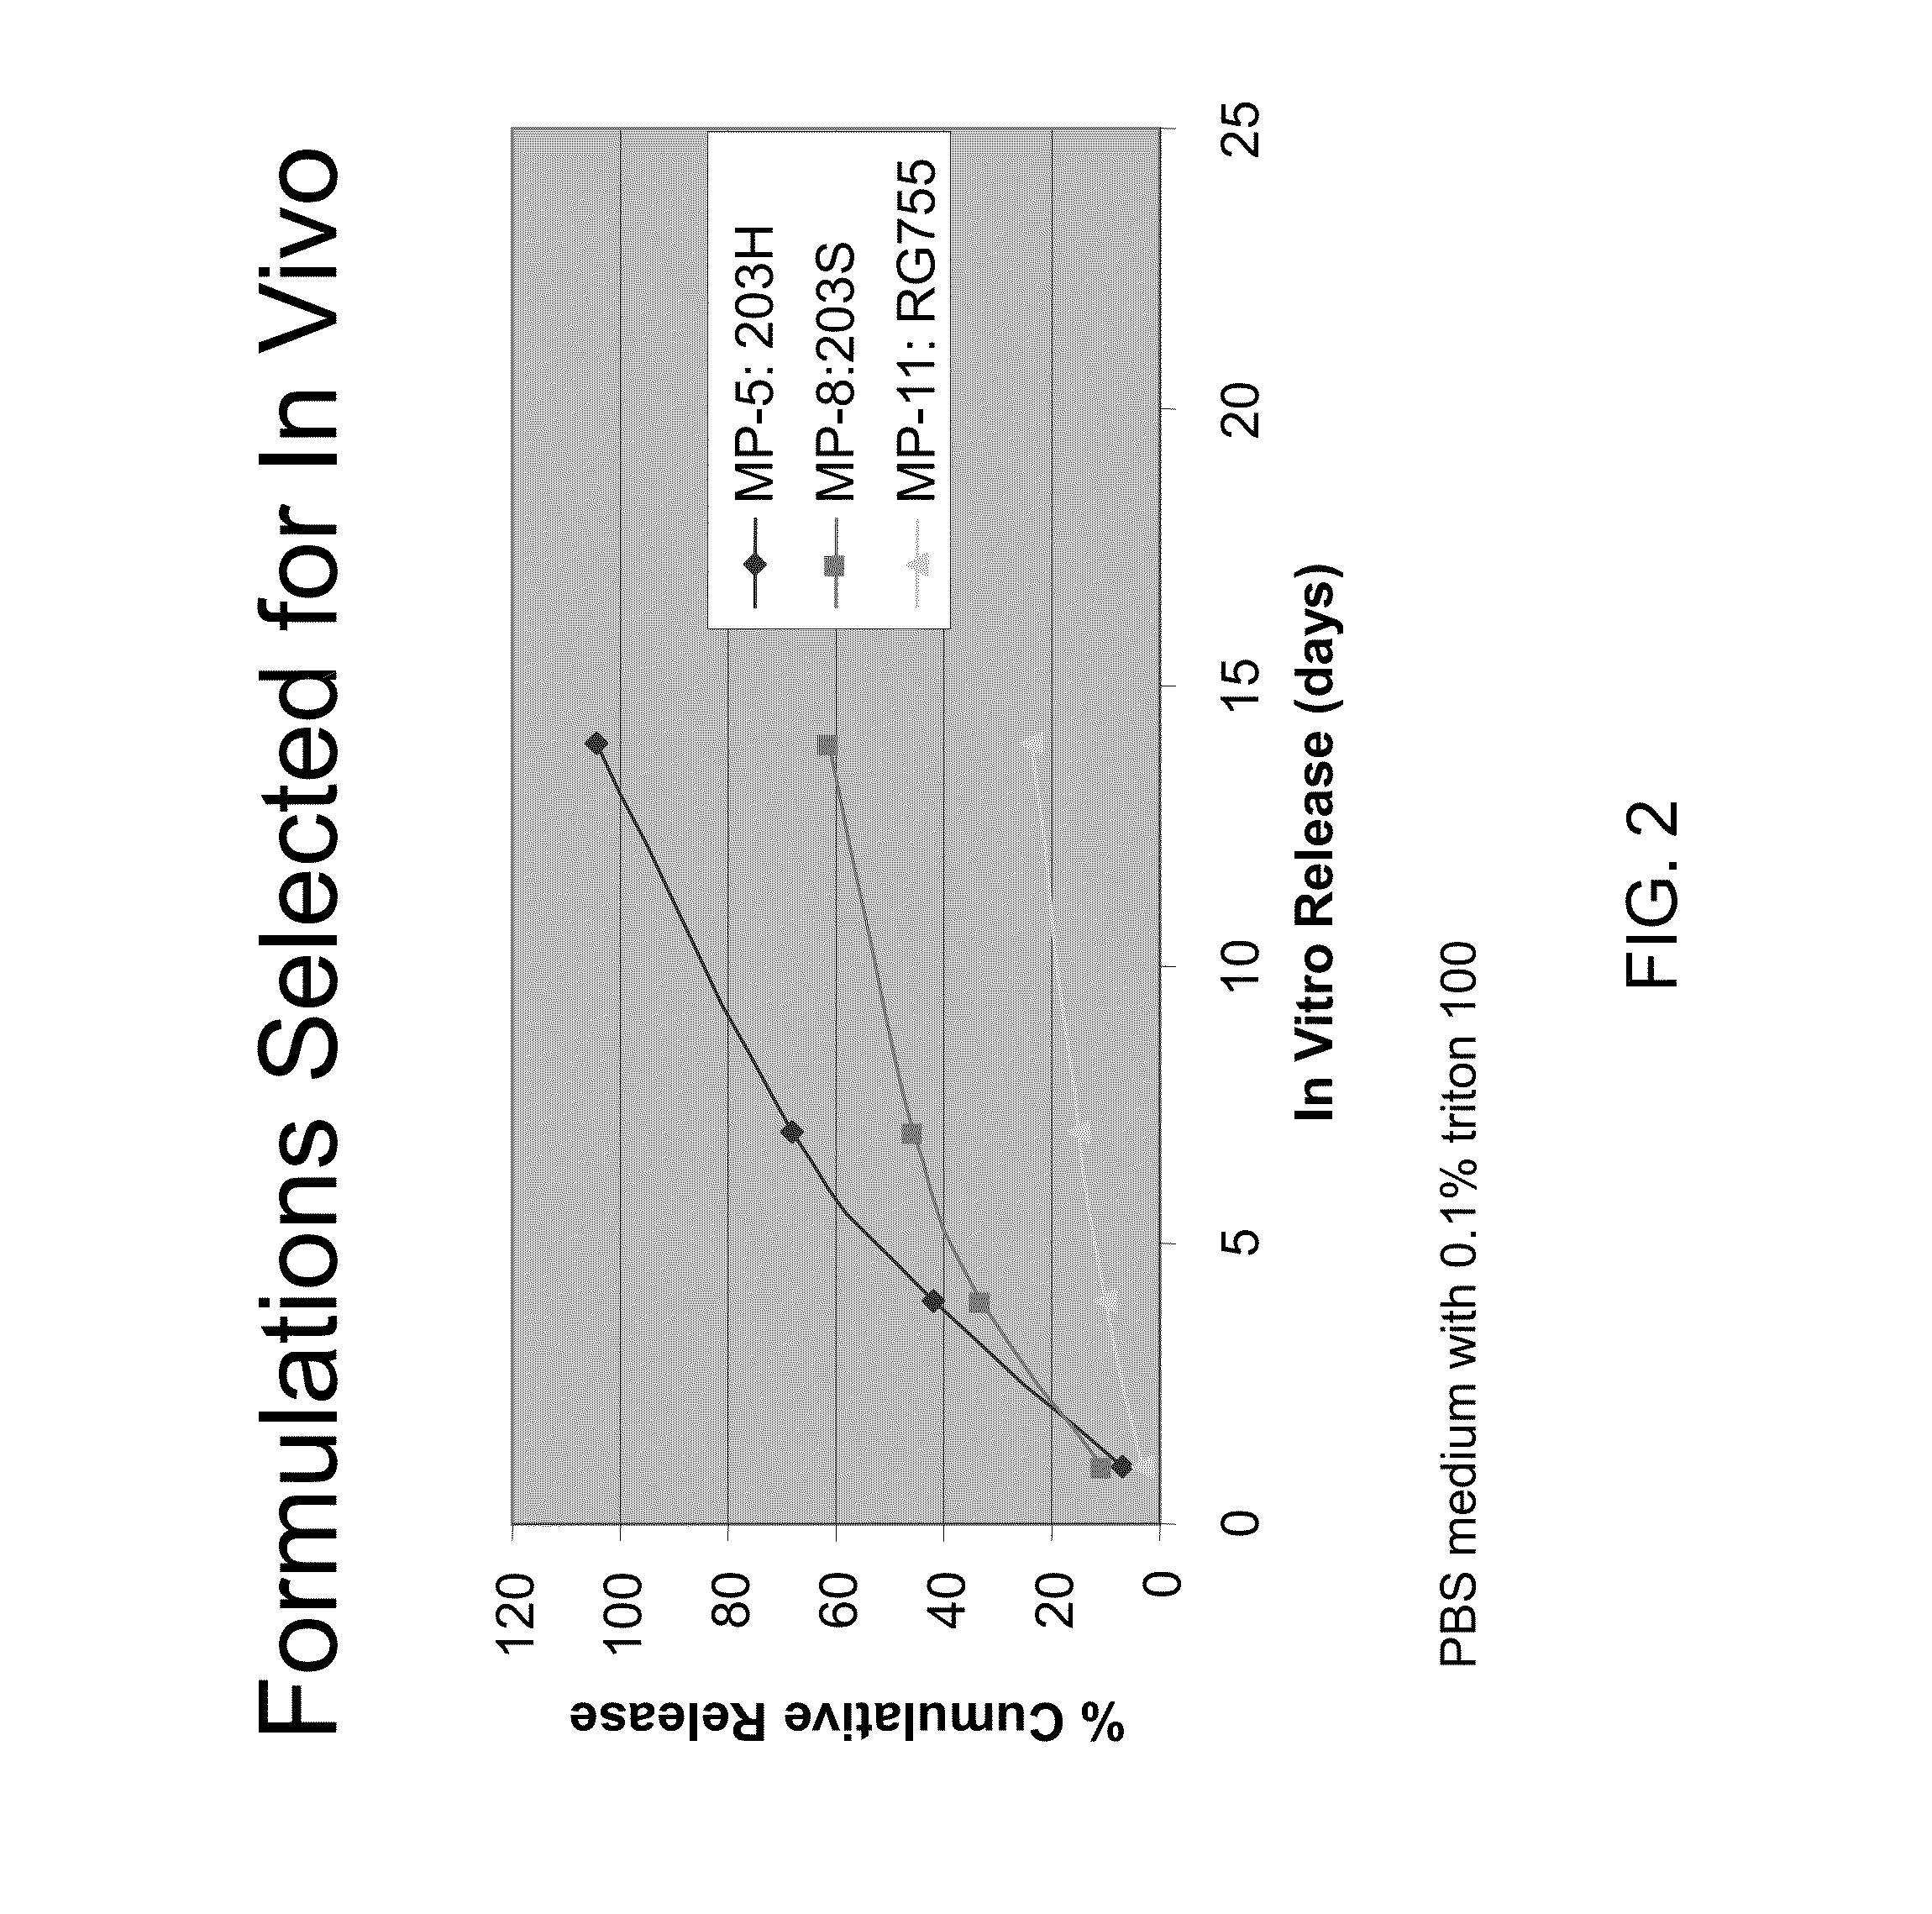 Prostaglandin and prostamide drug delivery systems and intraocular therapeutic uses thereof